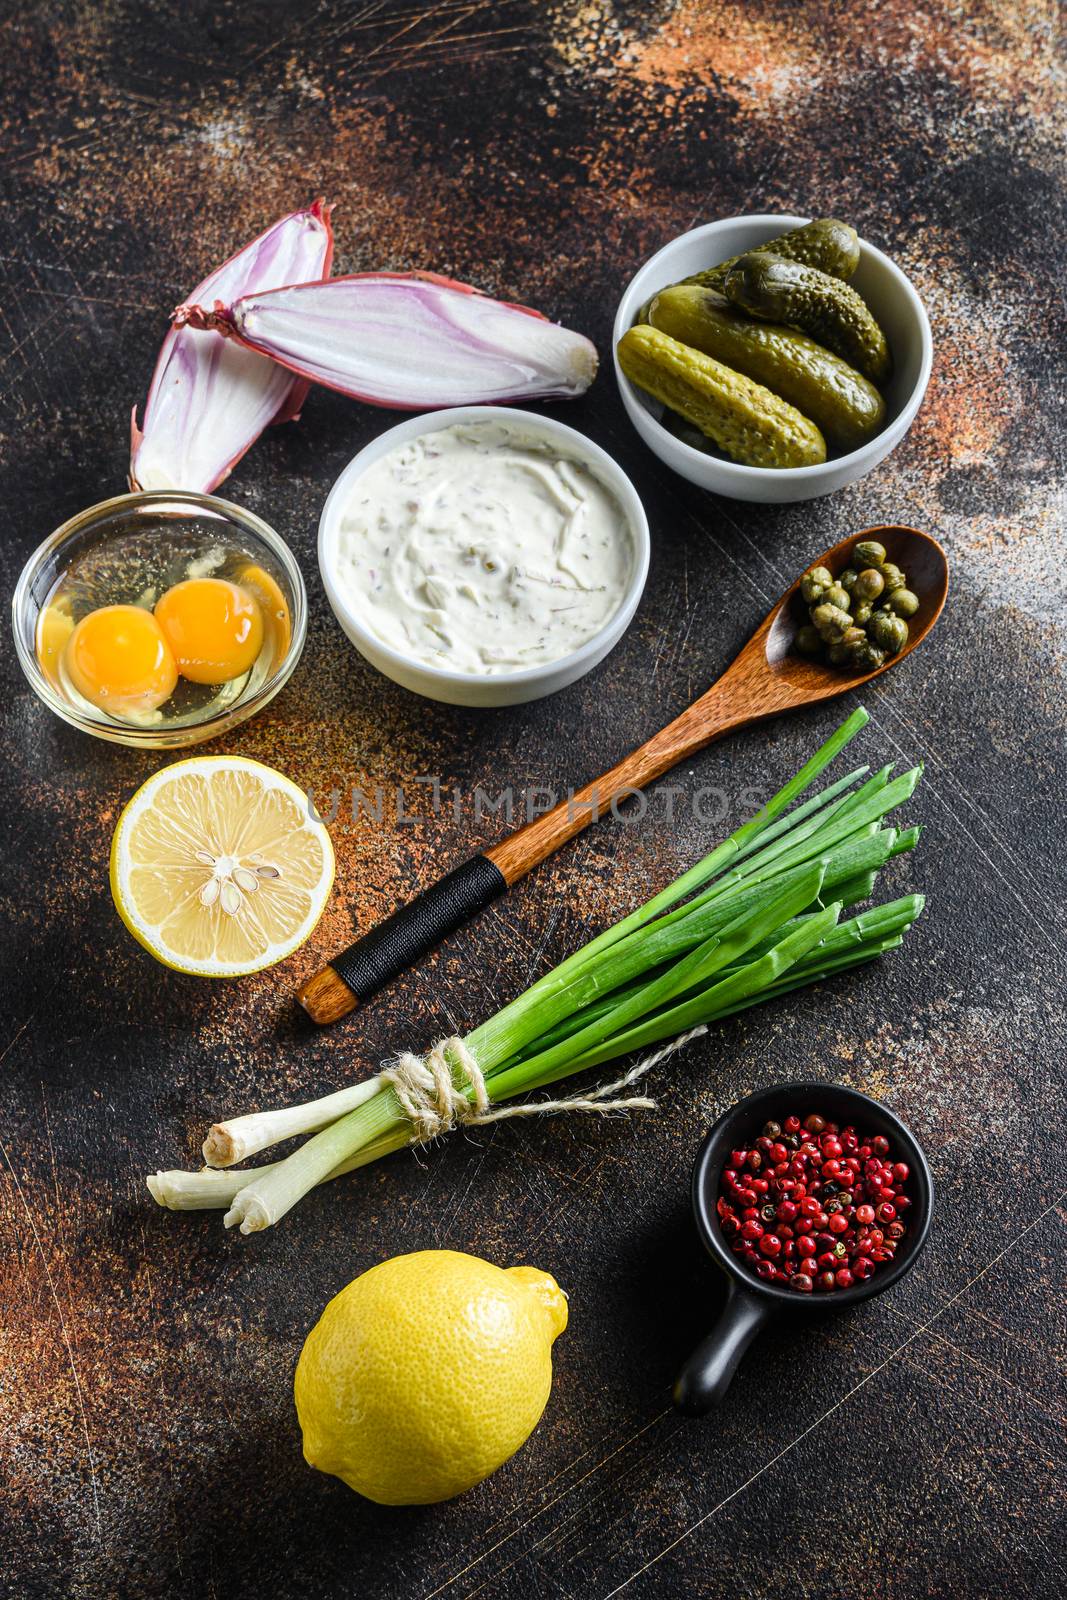 Ingredient tartar sauce organic mayonnaise, lemon,capers,parsley,dill,onion and various herbs. Over old rustic metall background Top view vertical by Ilianesolenyi